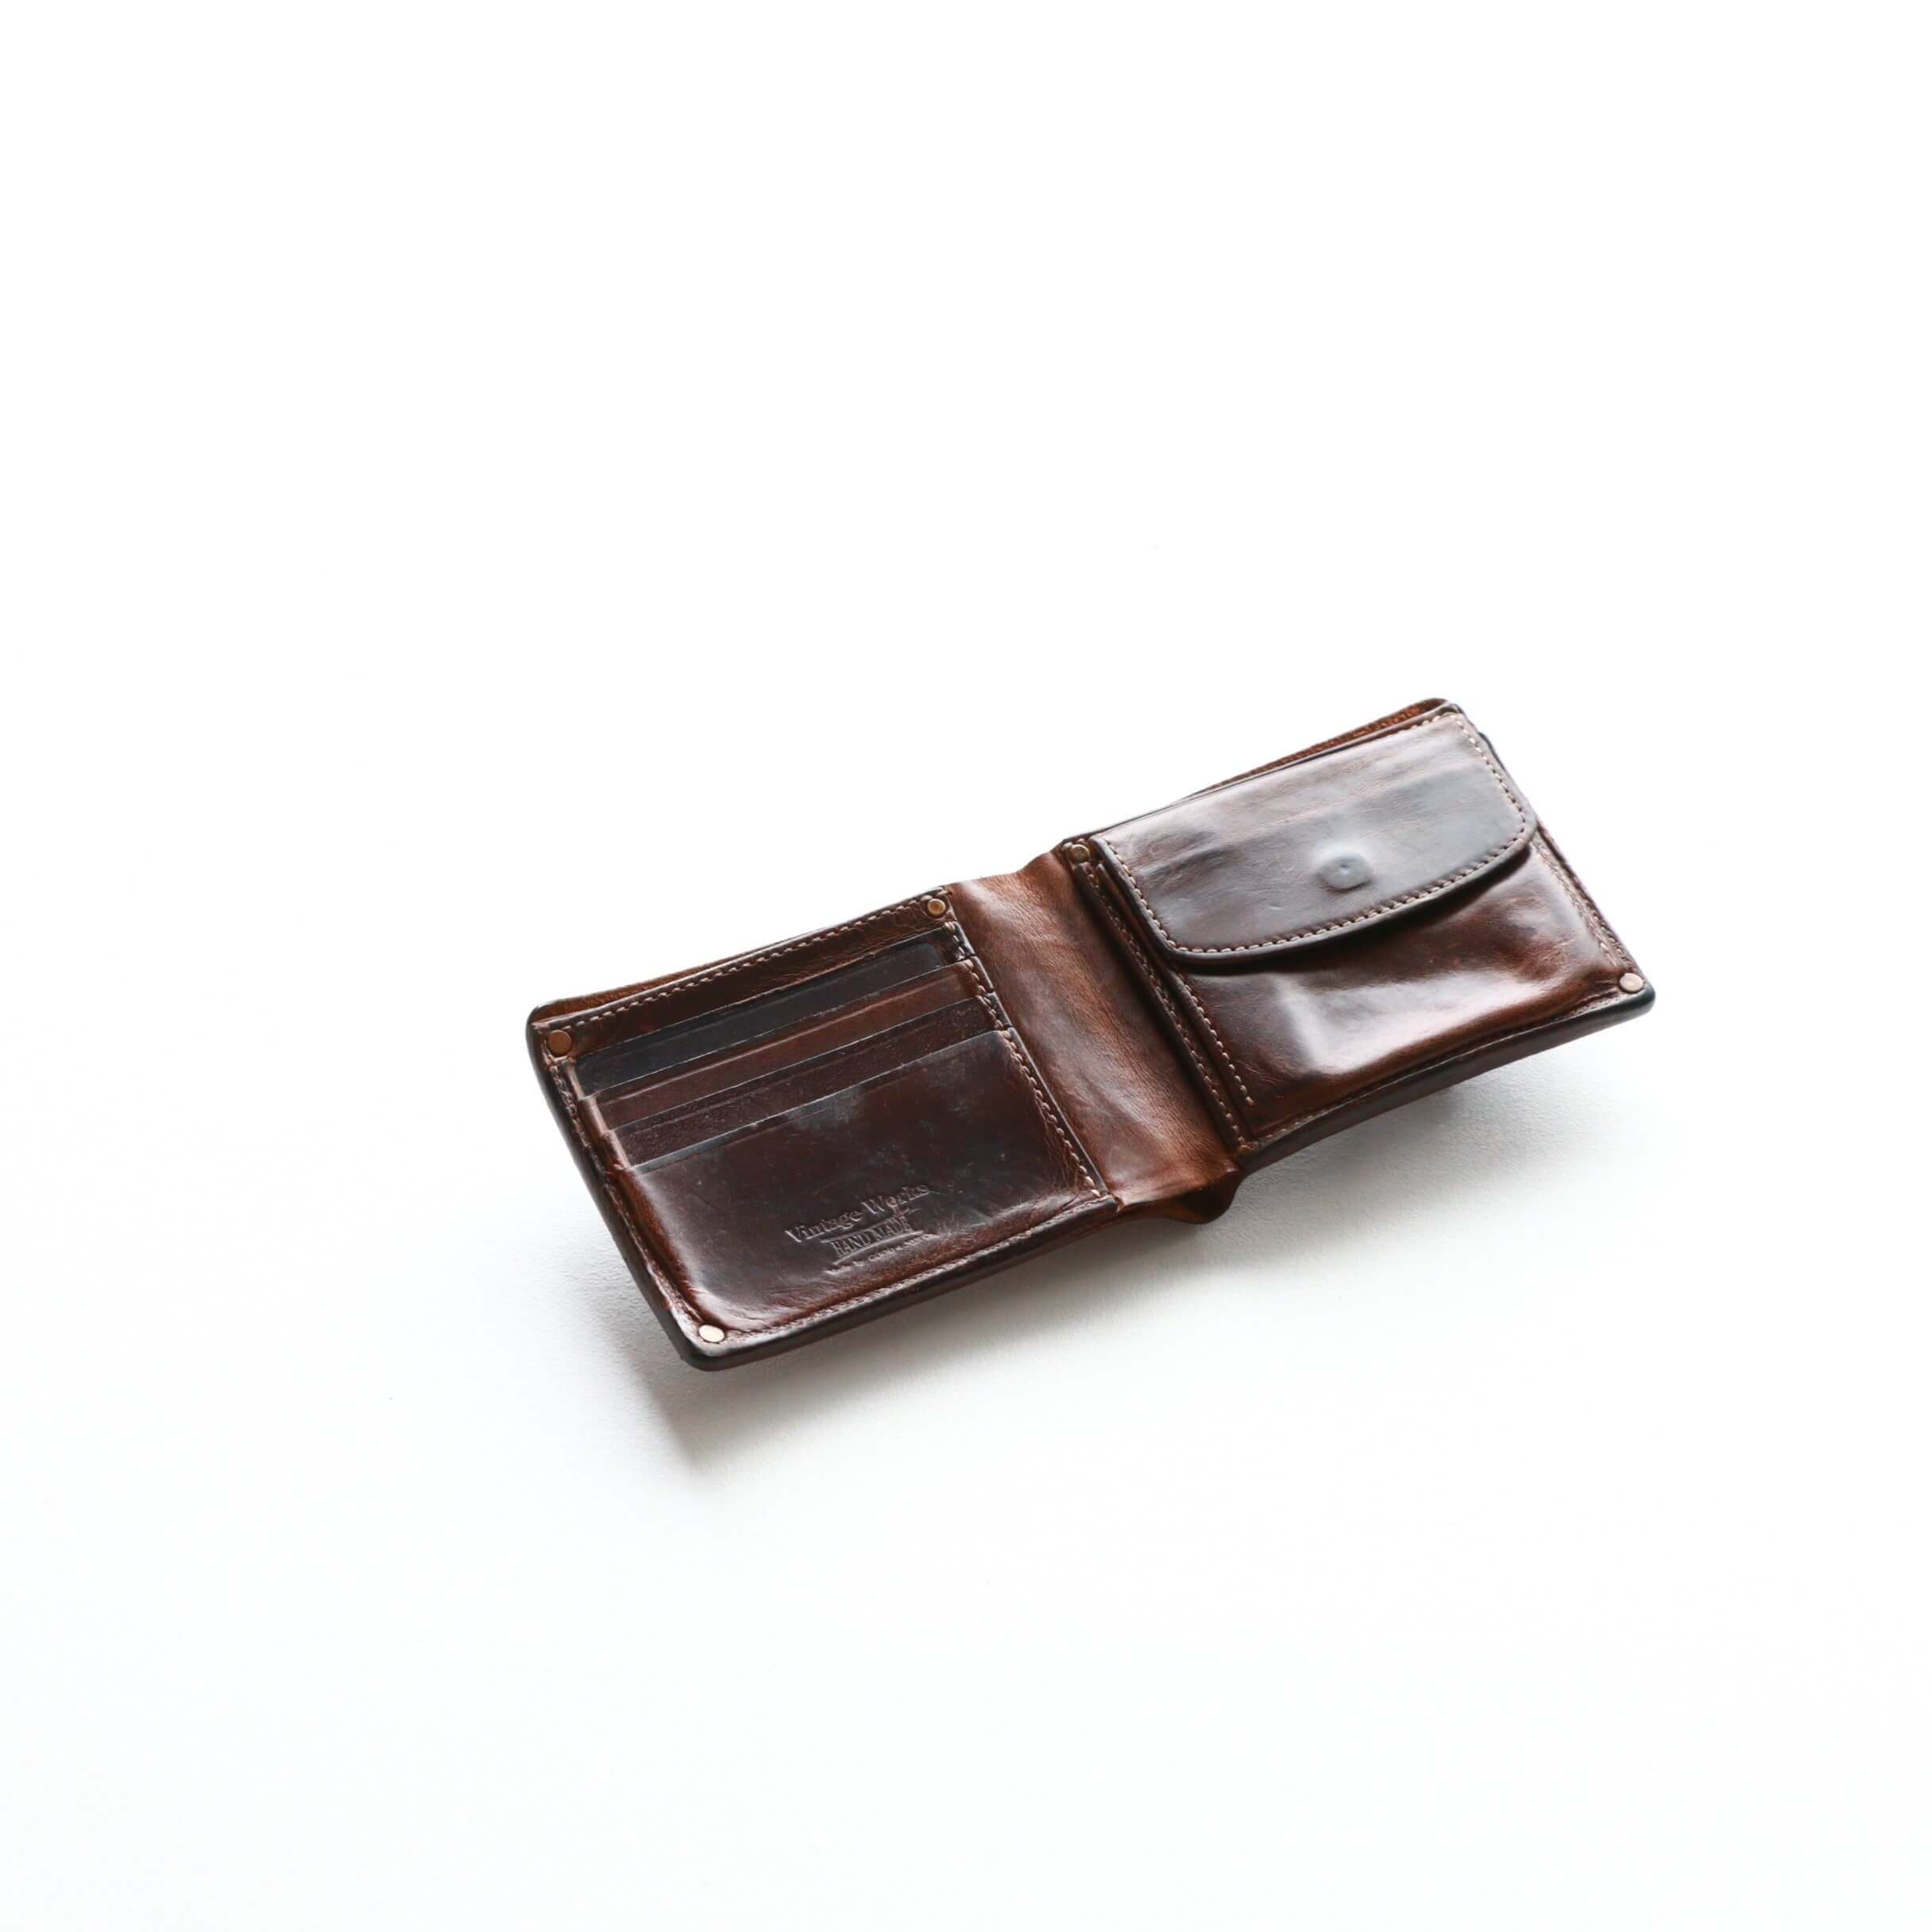 Vintage Works ヴィンテージワークス Leather Wallet クロムエクセルウォレット OIL.NAT